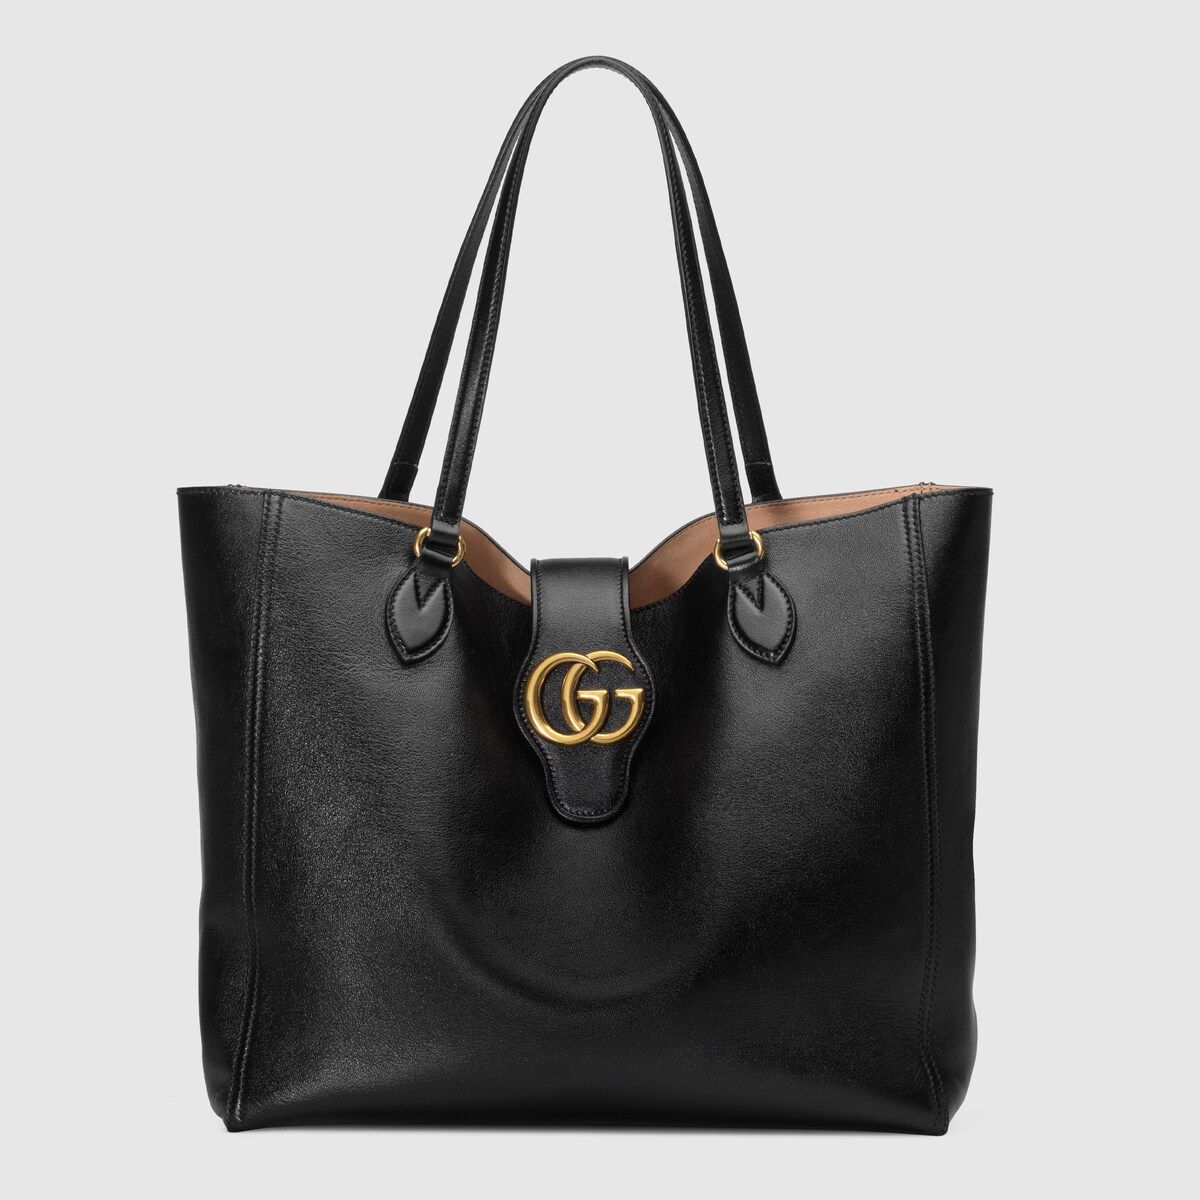 Gucci Medium tote with Double G | Gucci (US)